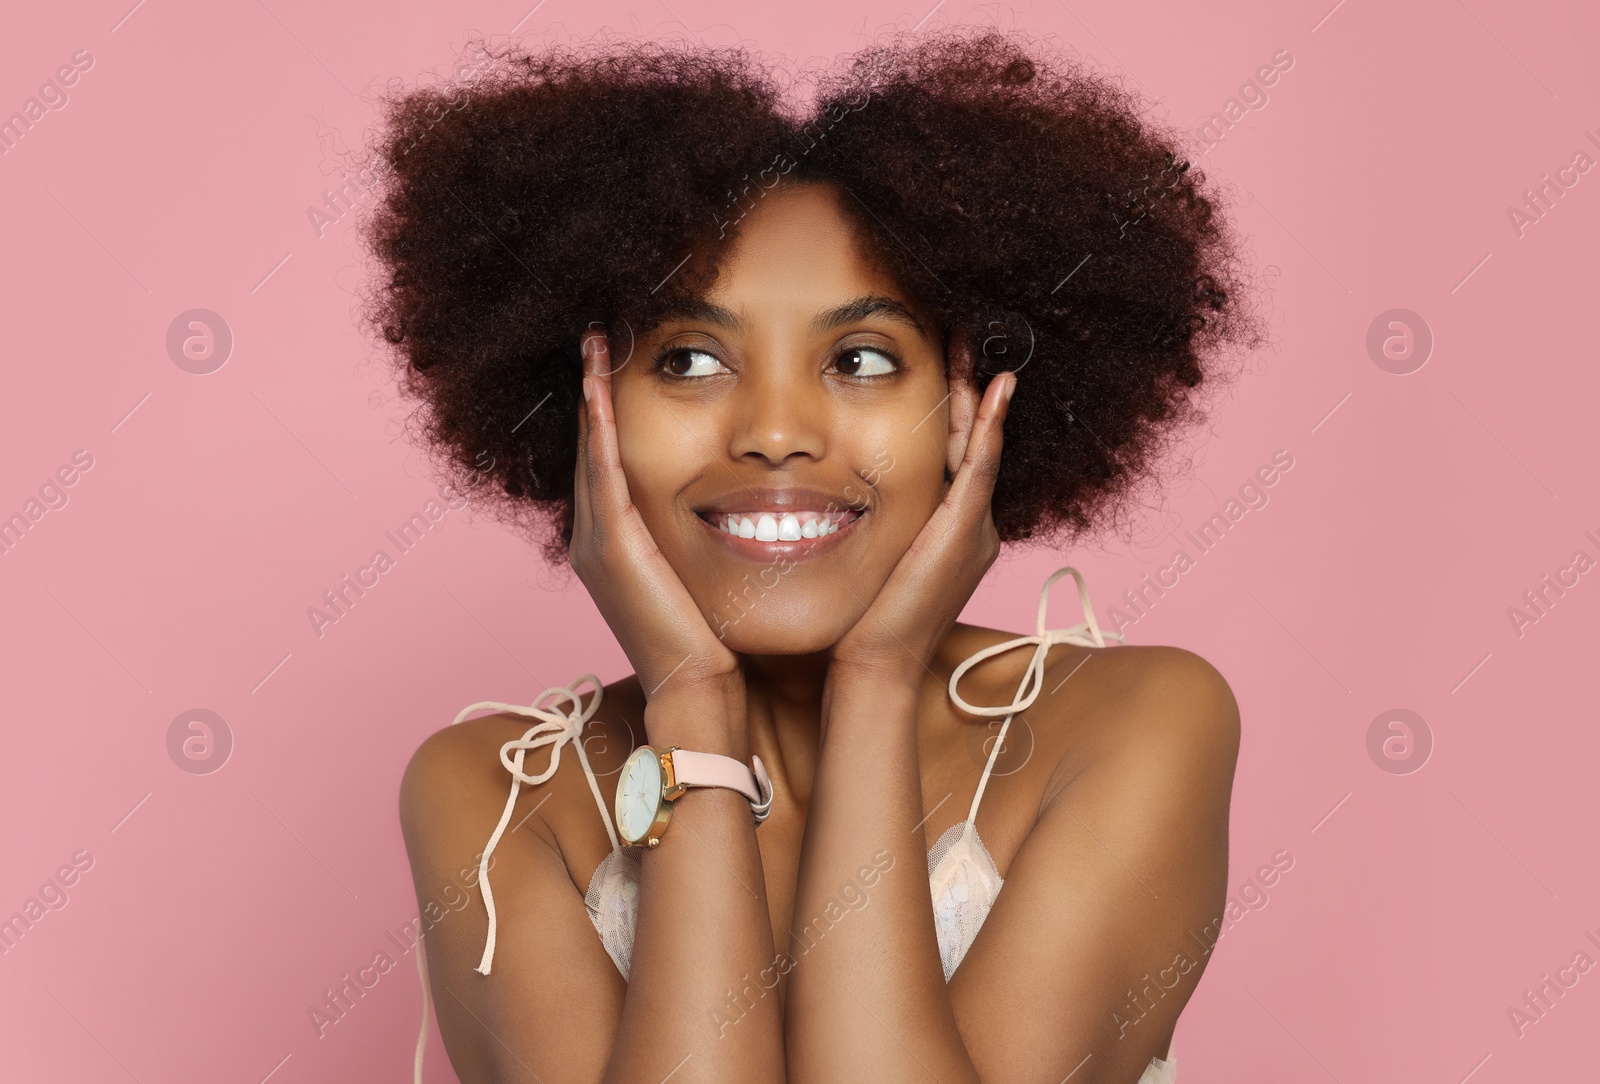 Photo of Portrait of smiling African American woman on pink background